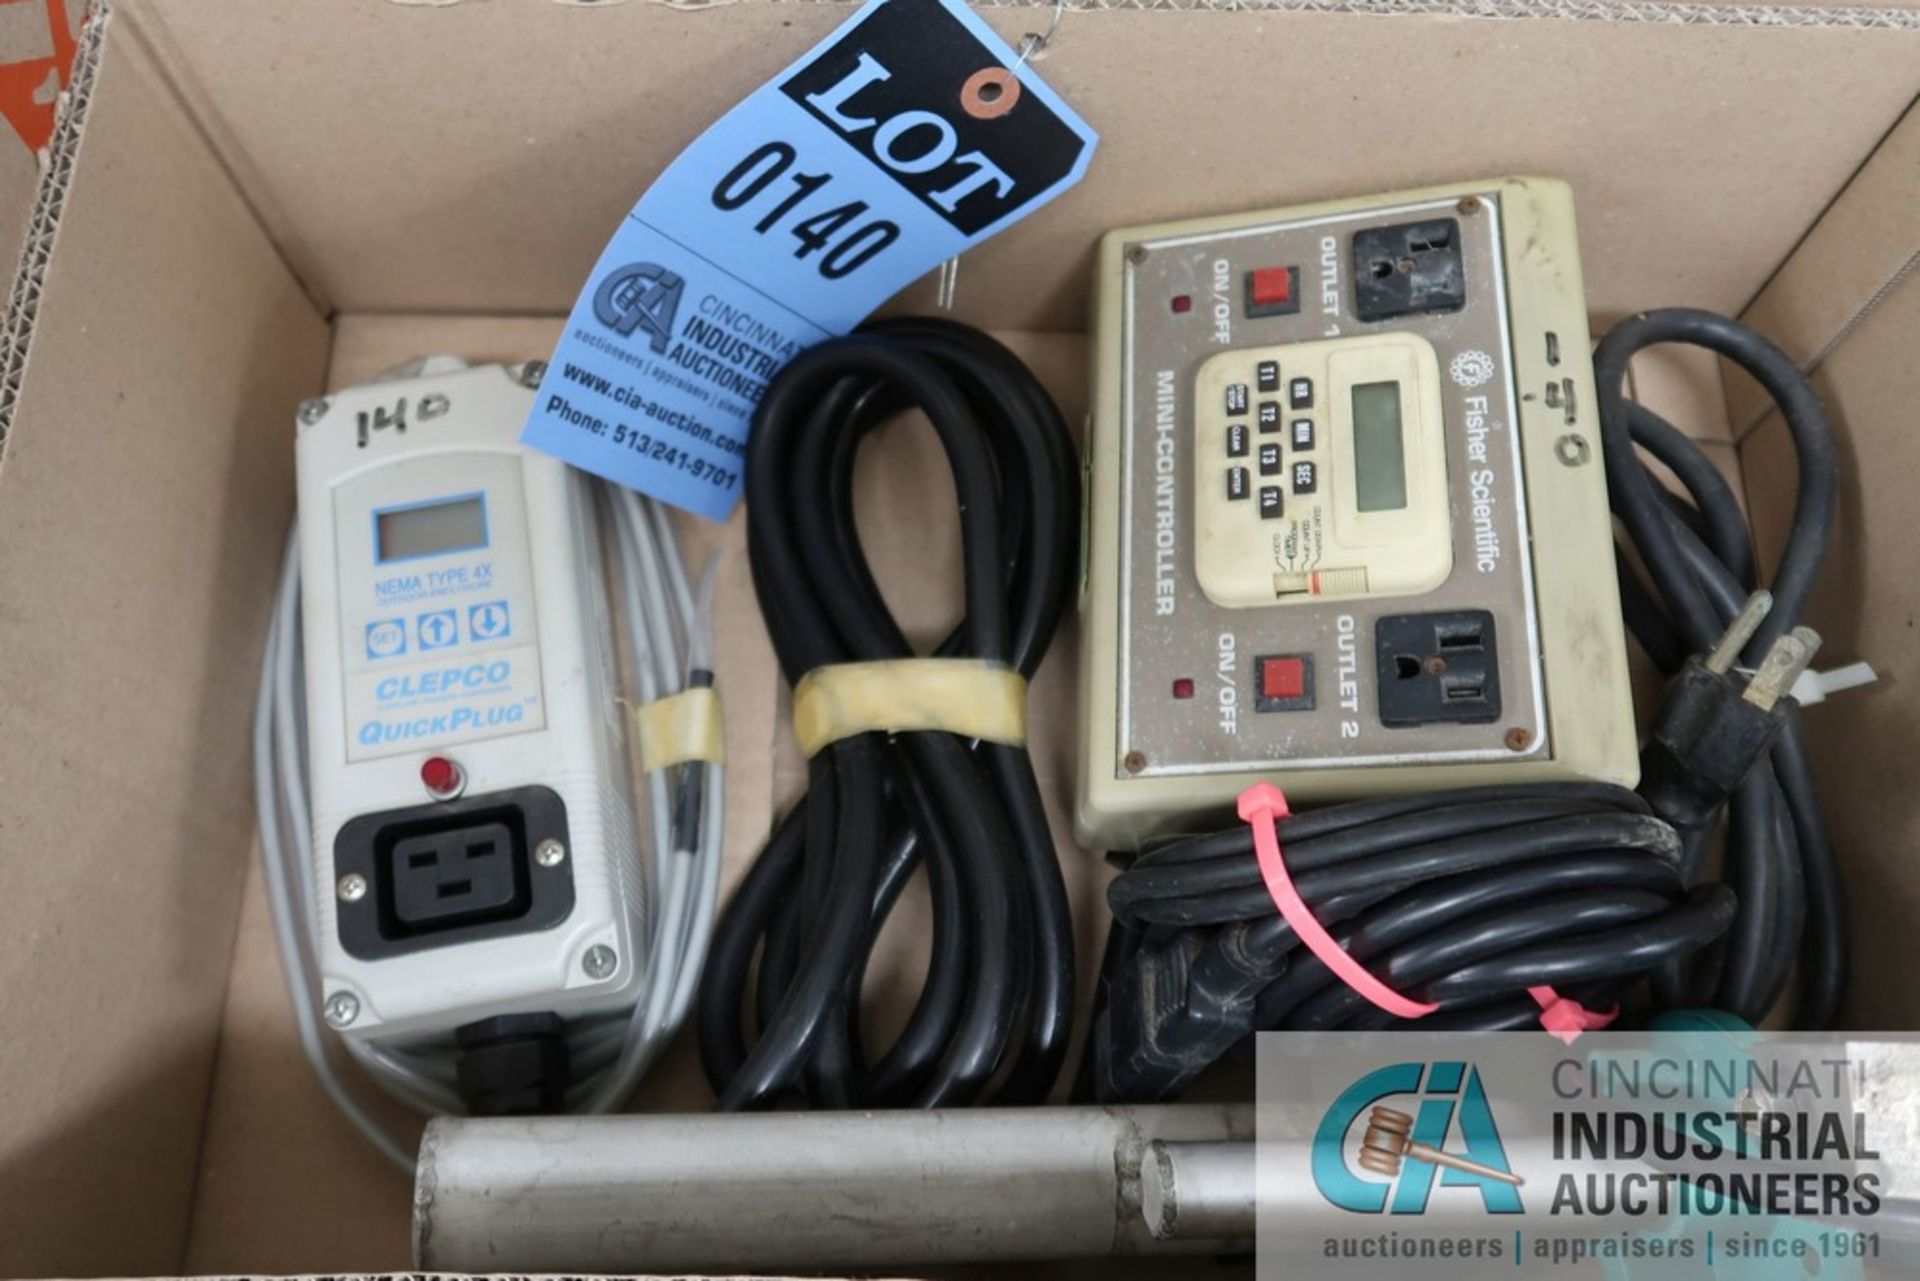 (LOT) CLEPCO QUICK PLUG AND FISHER SCIENTIFIC MINI-CONTROLLER